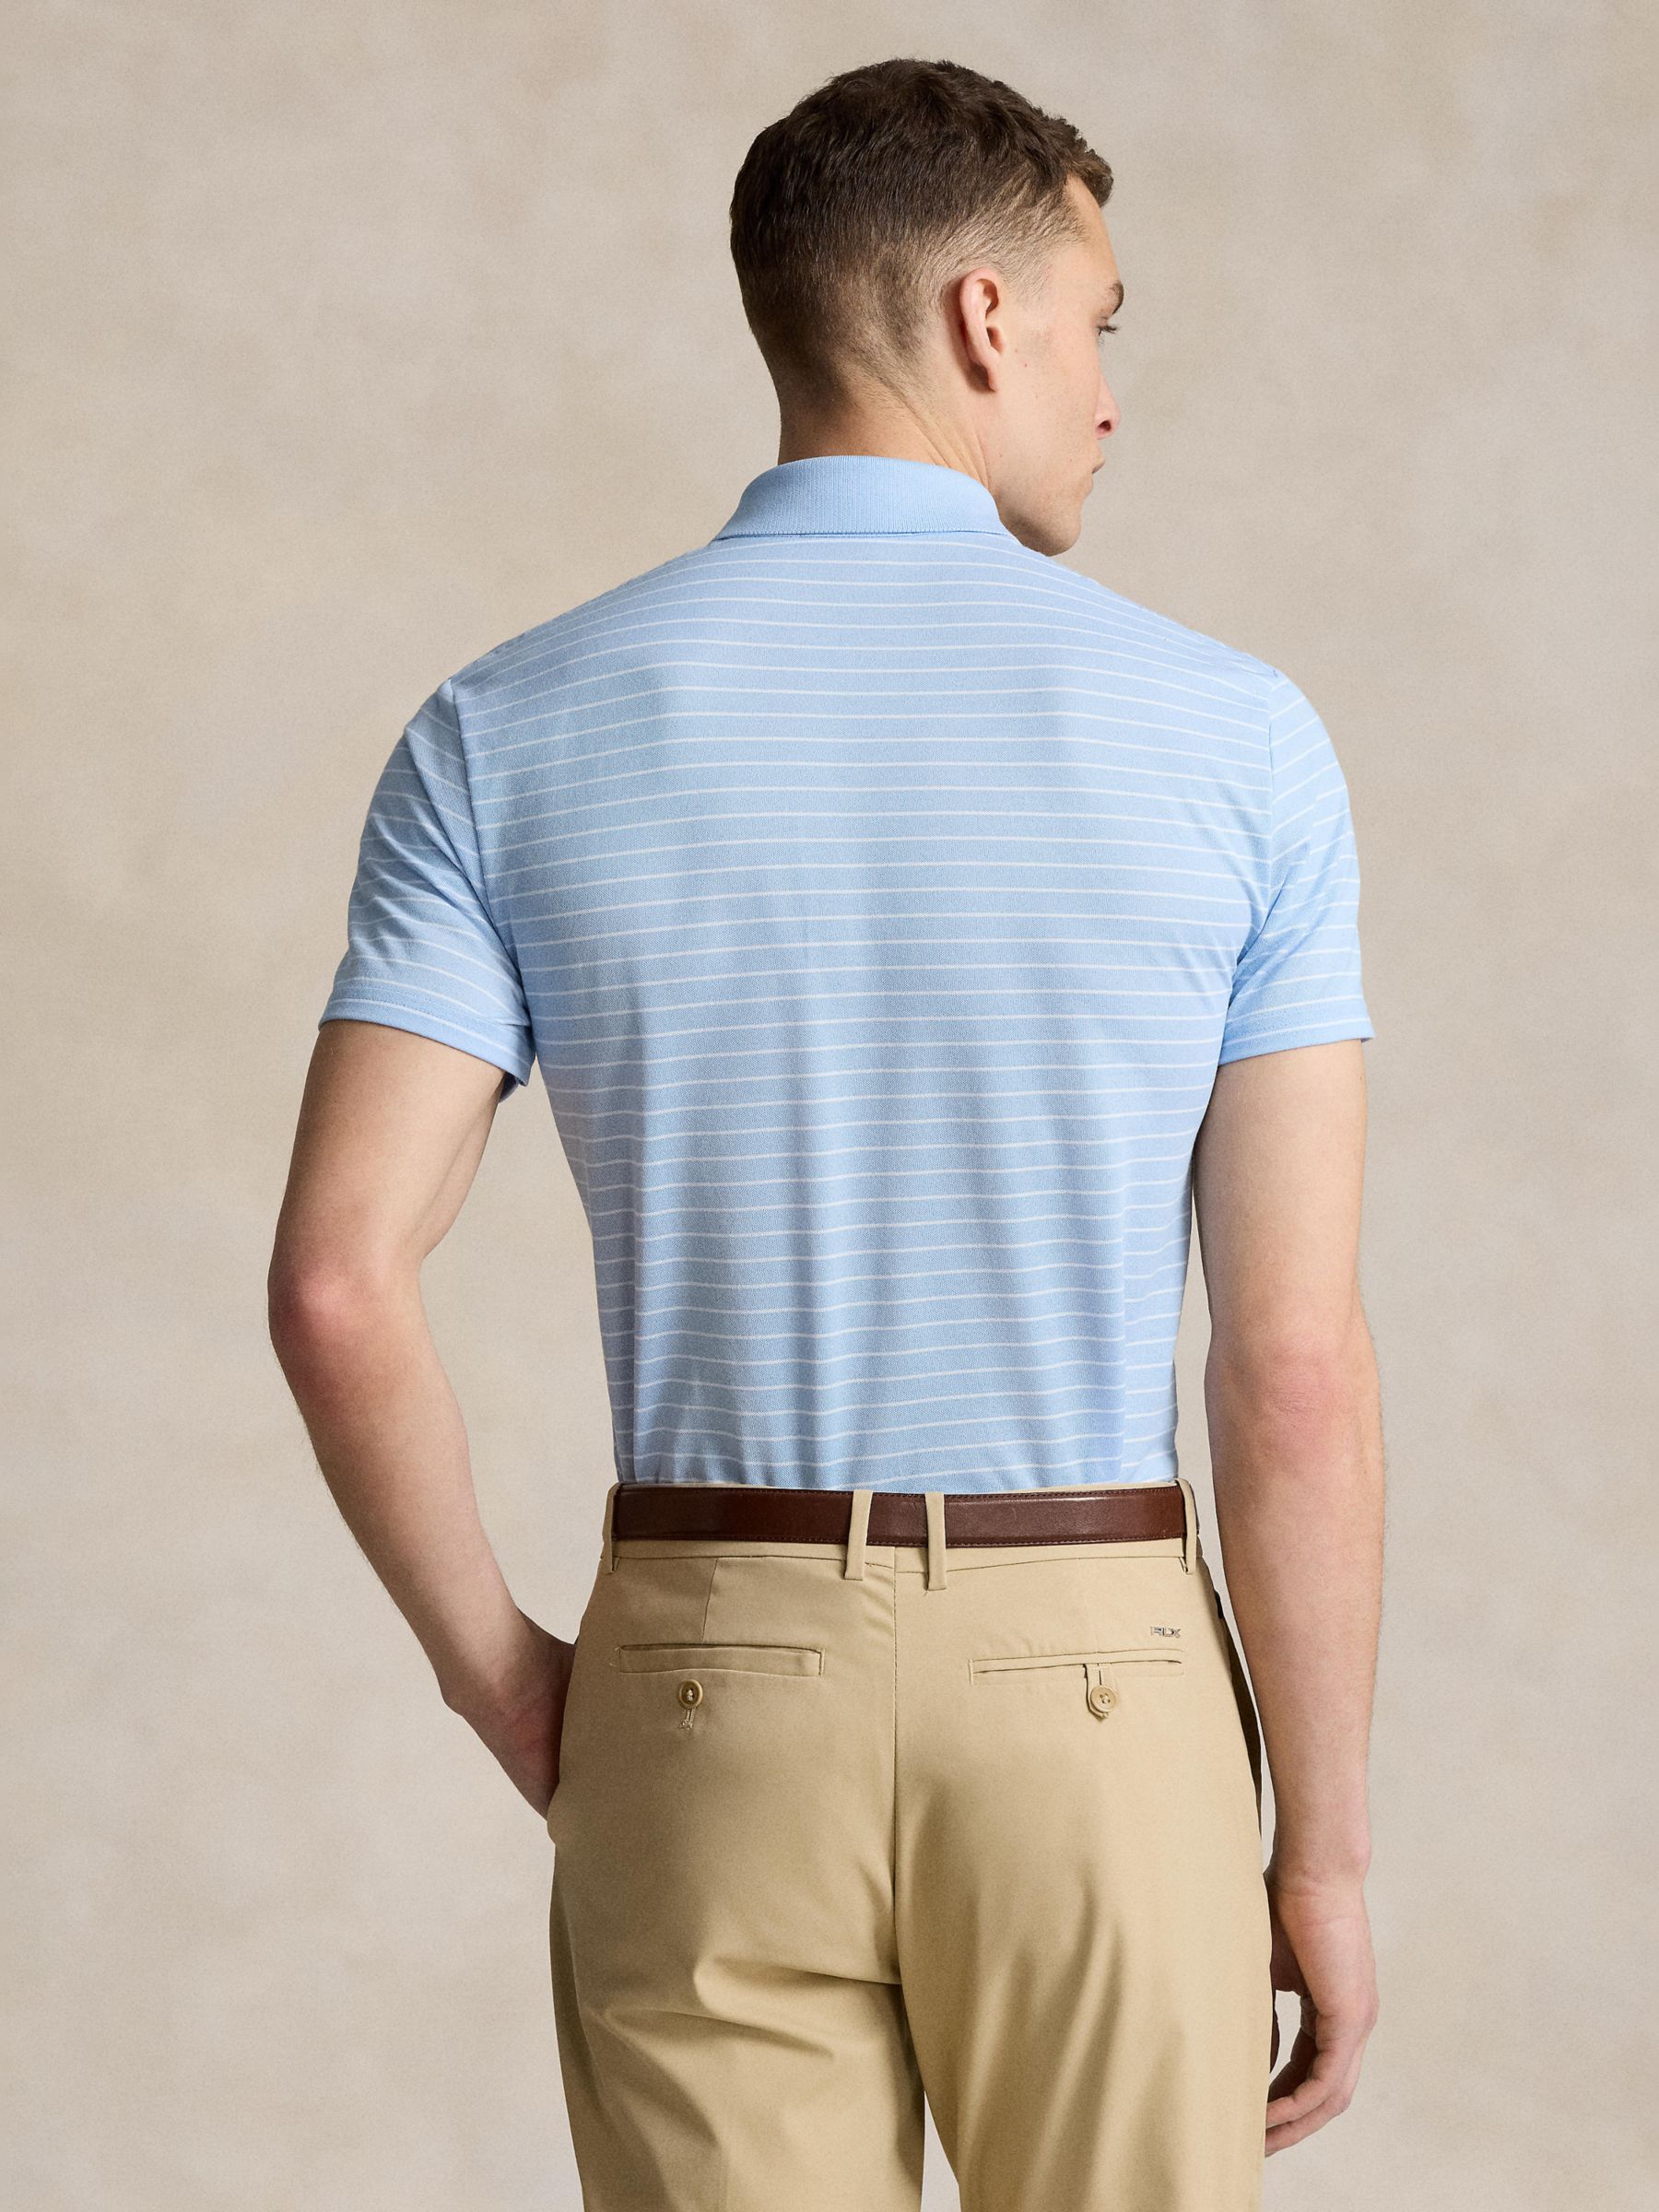 Buy Ralph Lauren Tailored Fit Performance Stripe Polo Shirt Online at johnlewis.com